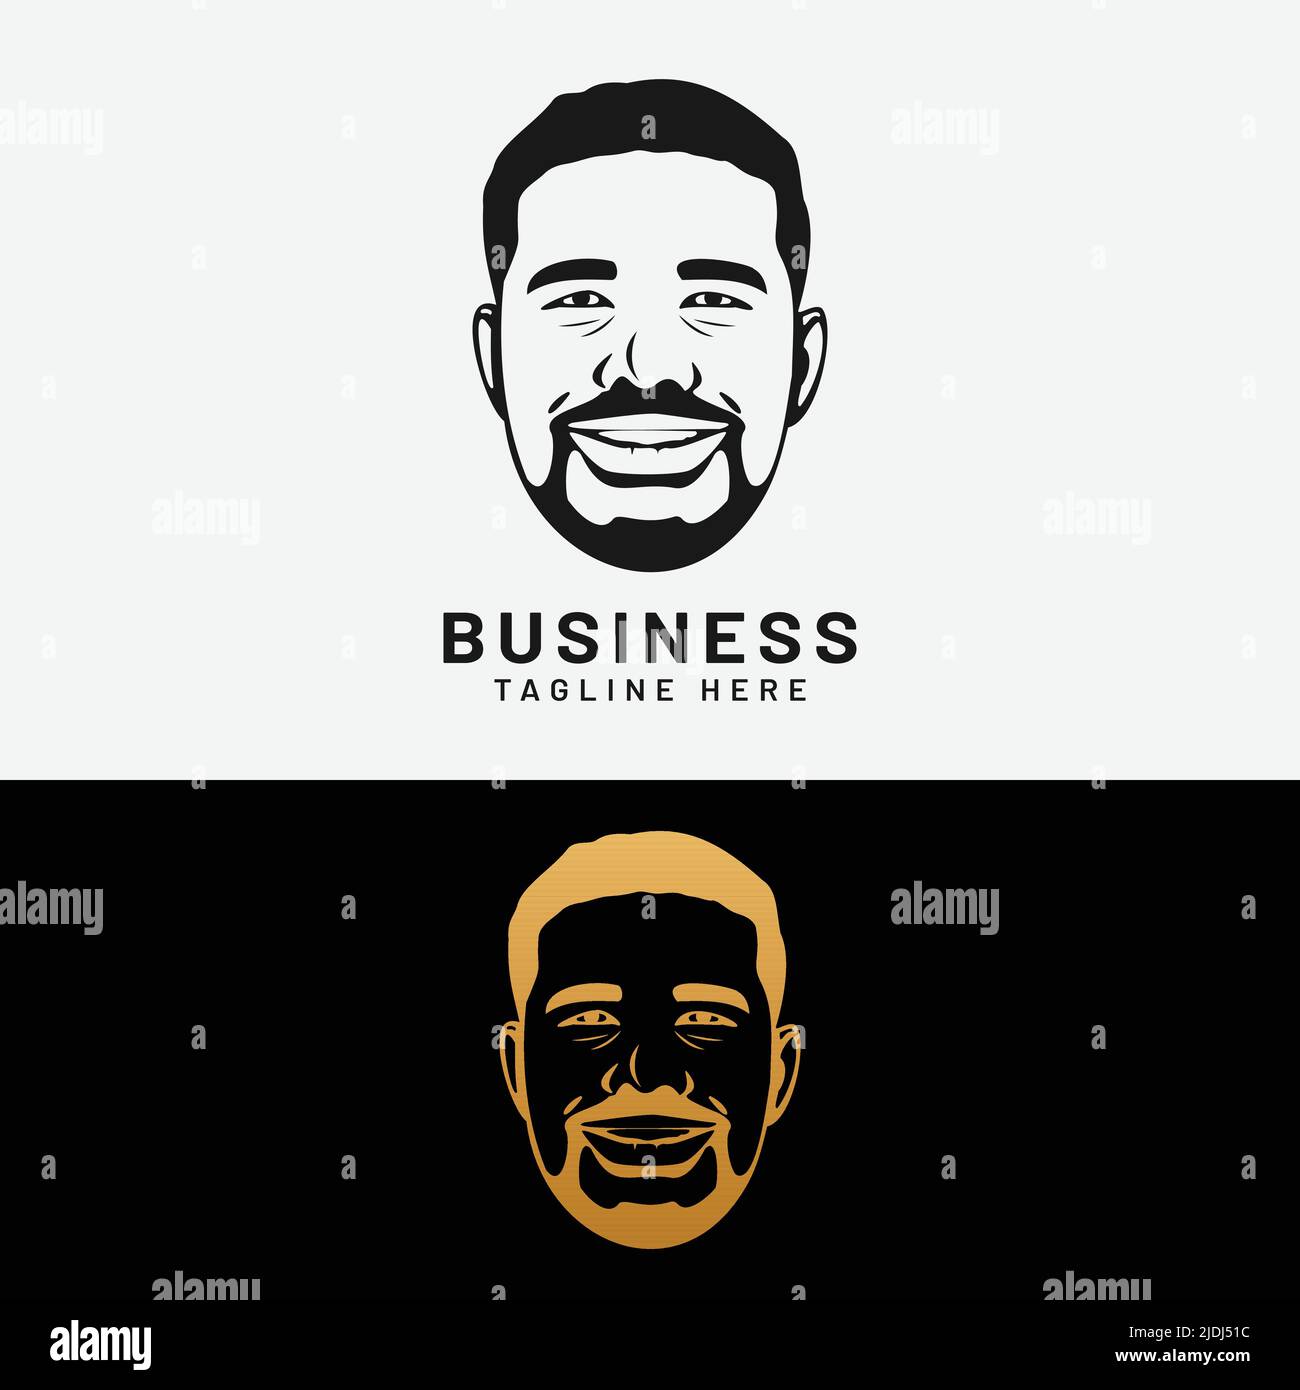 Smile Man Head Logo Design Template. Suitable for General Sports Fitness Finance Construction Company Business Corporate Shop Apparel in Simple Modern Stock Vector